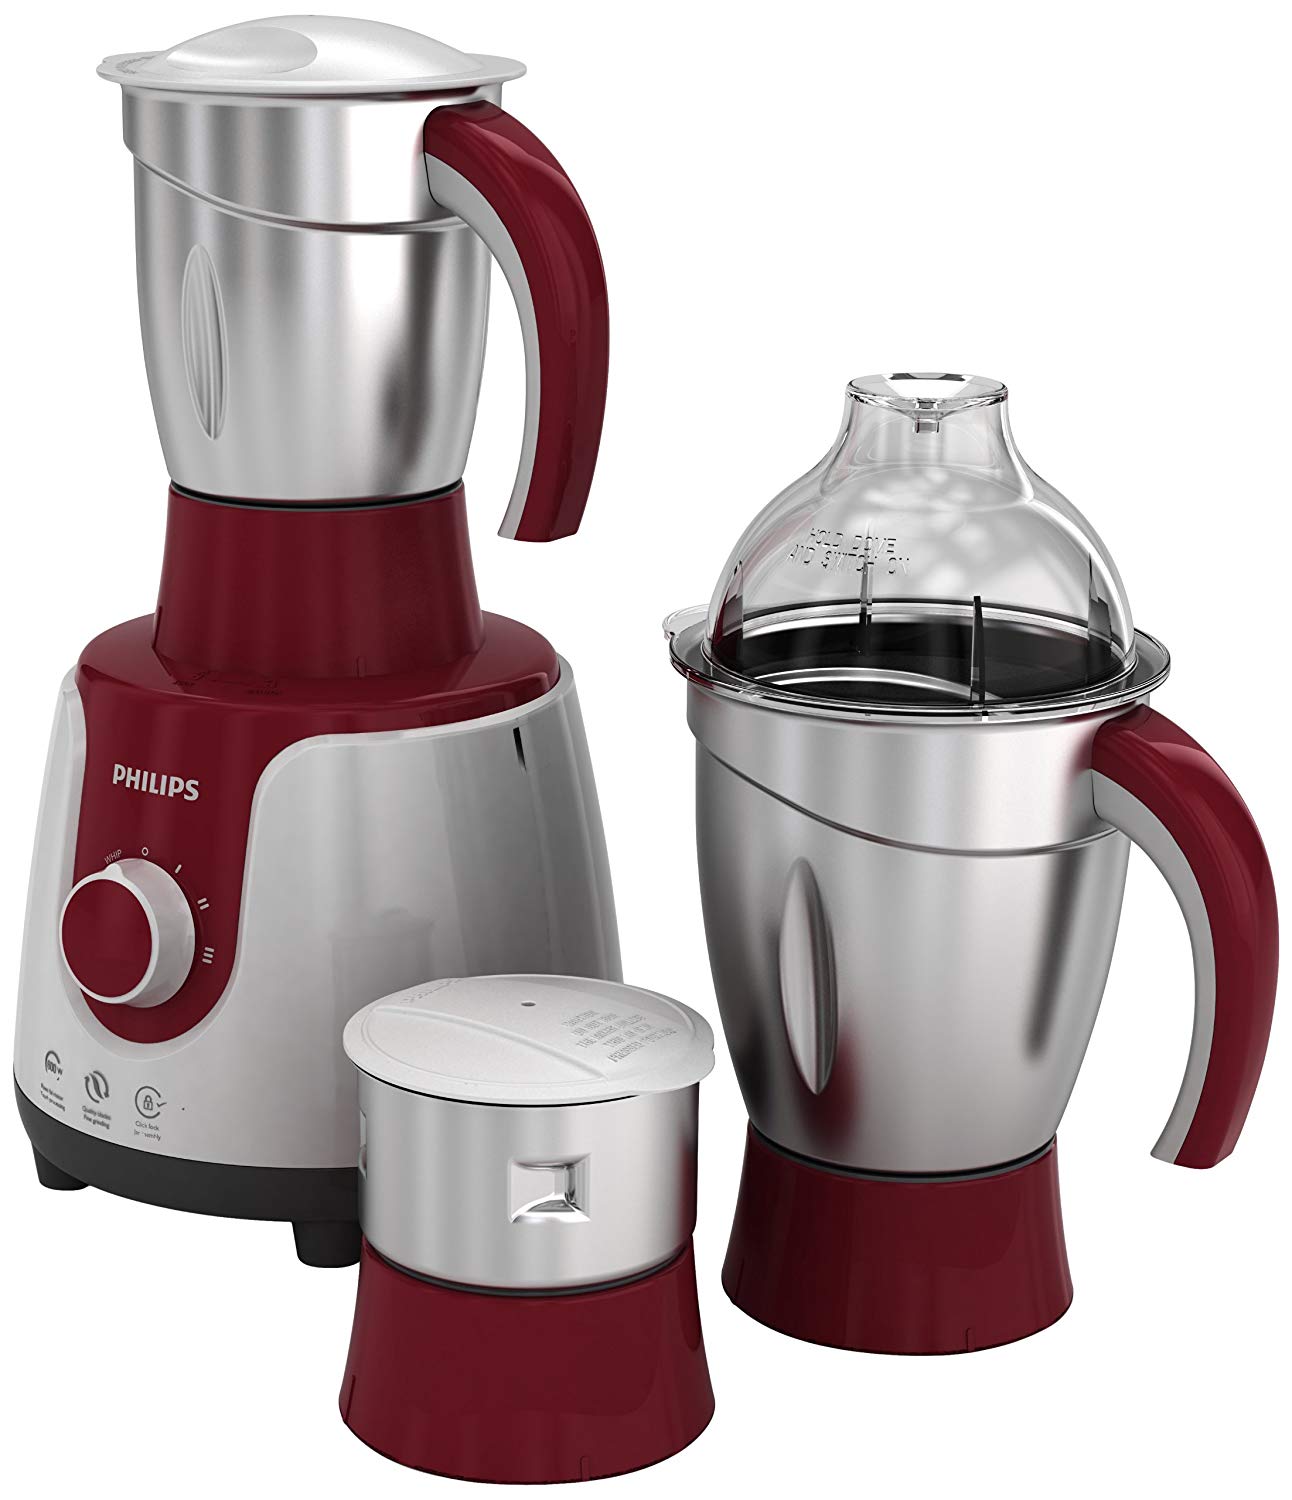 Preethi Vs Philips Better Mixer Grinder In India Answered